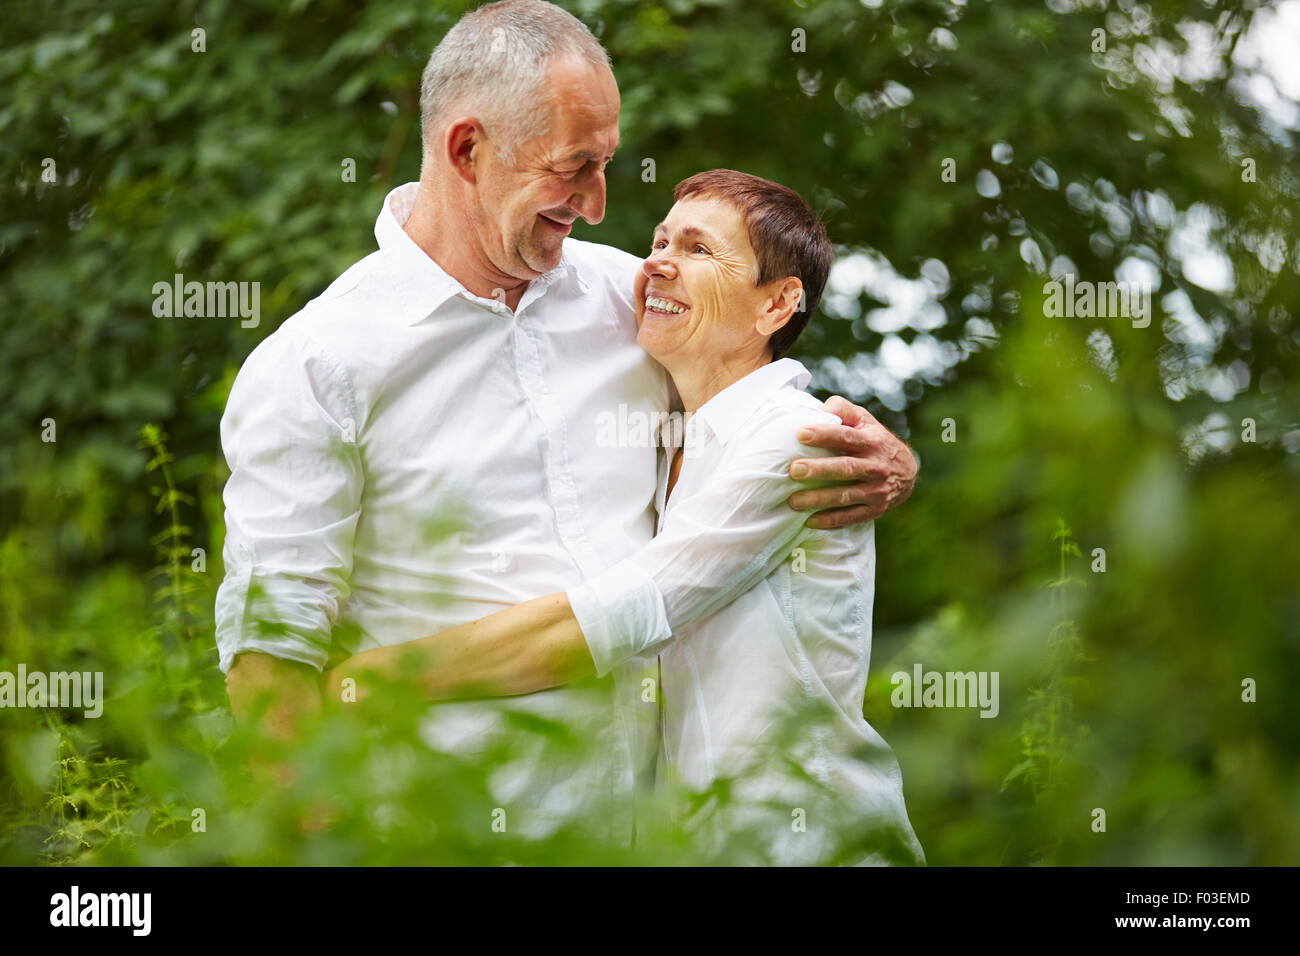 Senior couple in love embracing each other in nature in summer Stock Photo